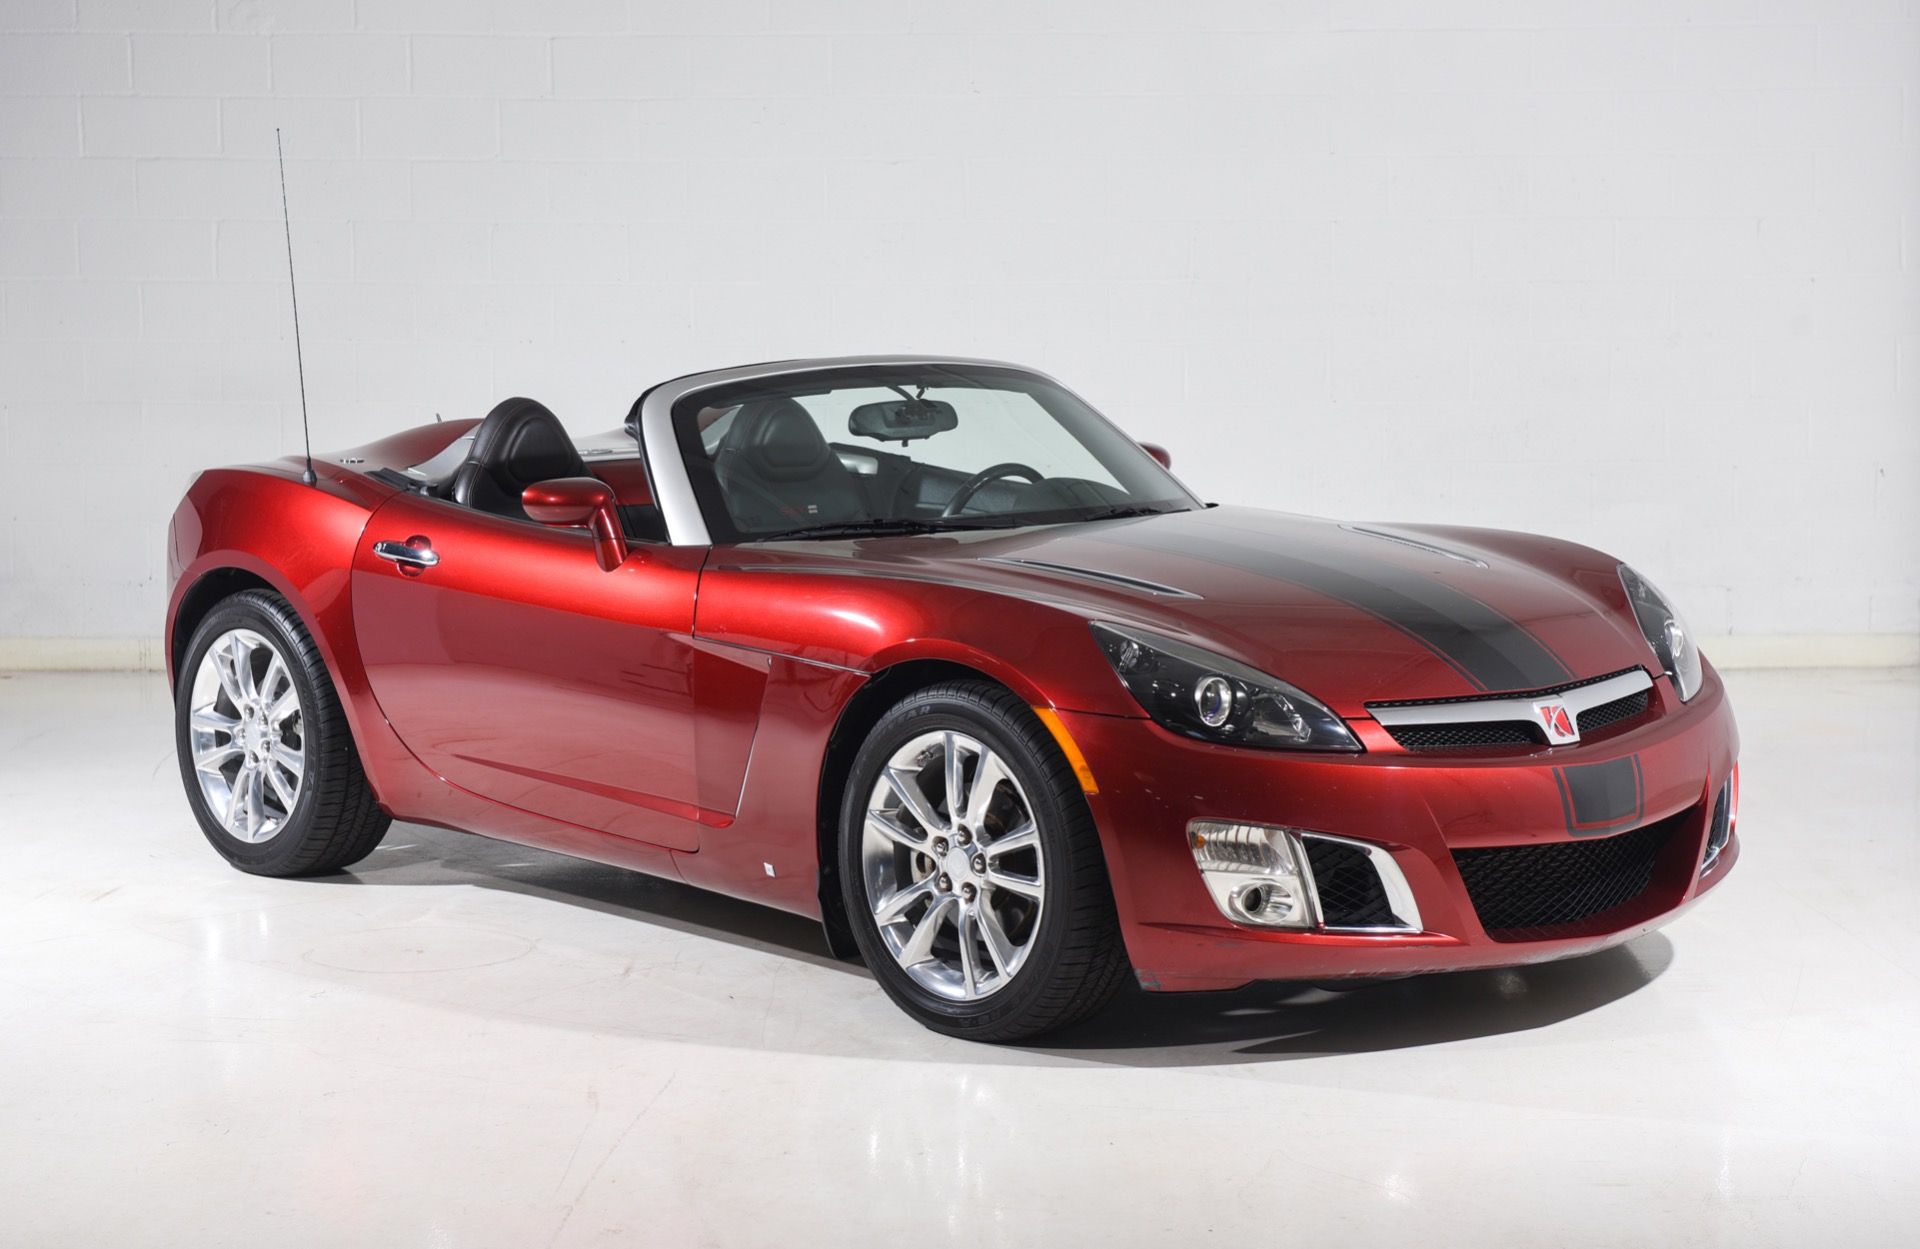 Used 2009 Saturn SKY Red Line Ruby Red SE For Sale ($14,900) | Motorcar  Classics Stock #1416